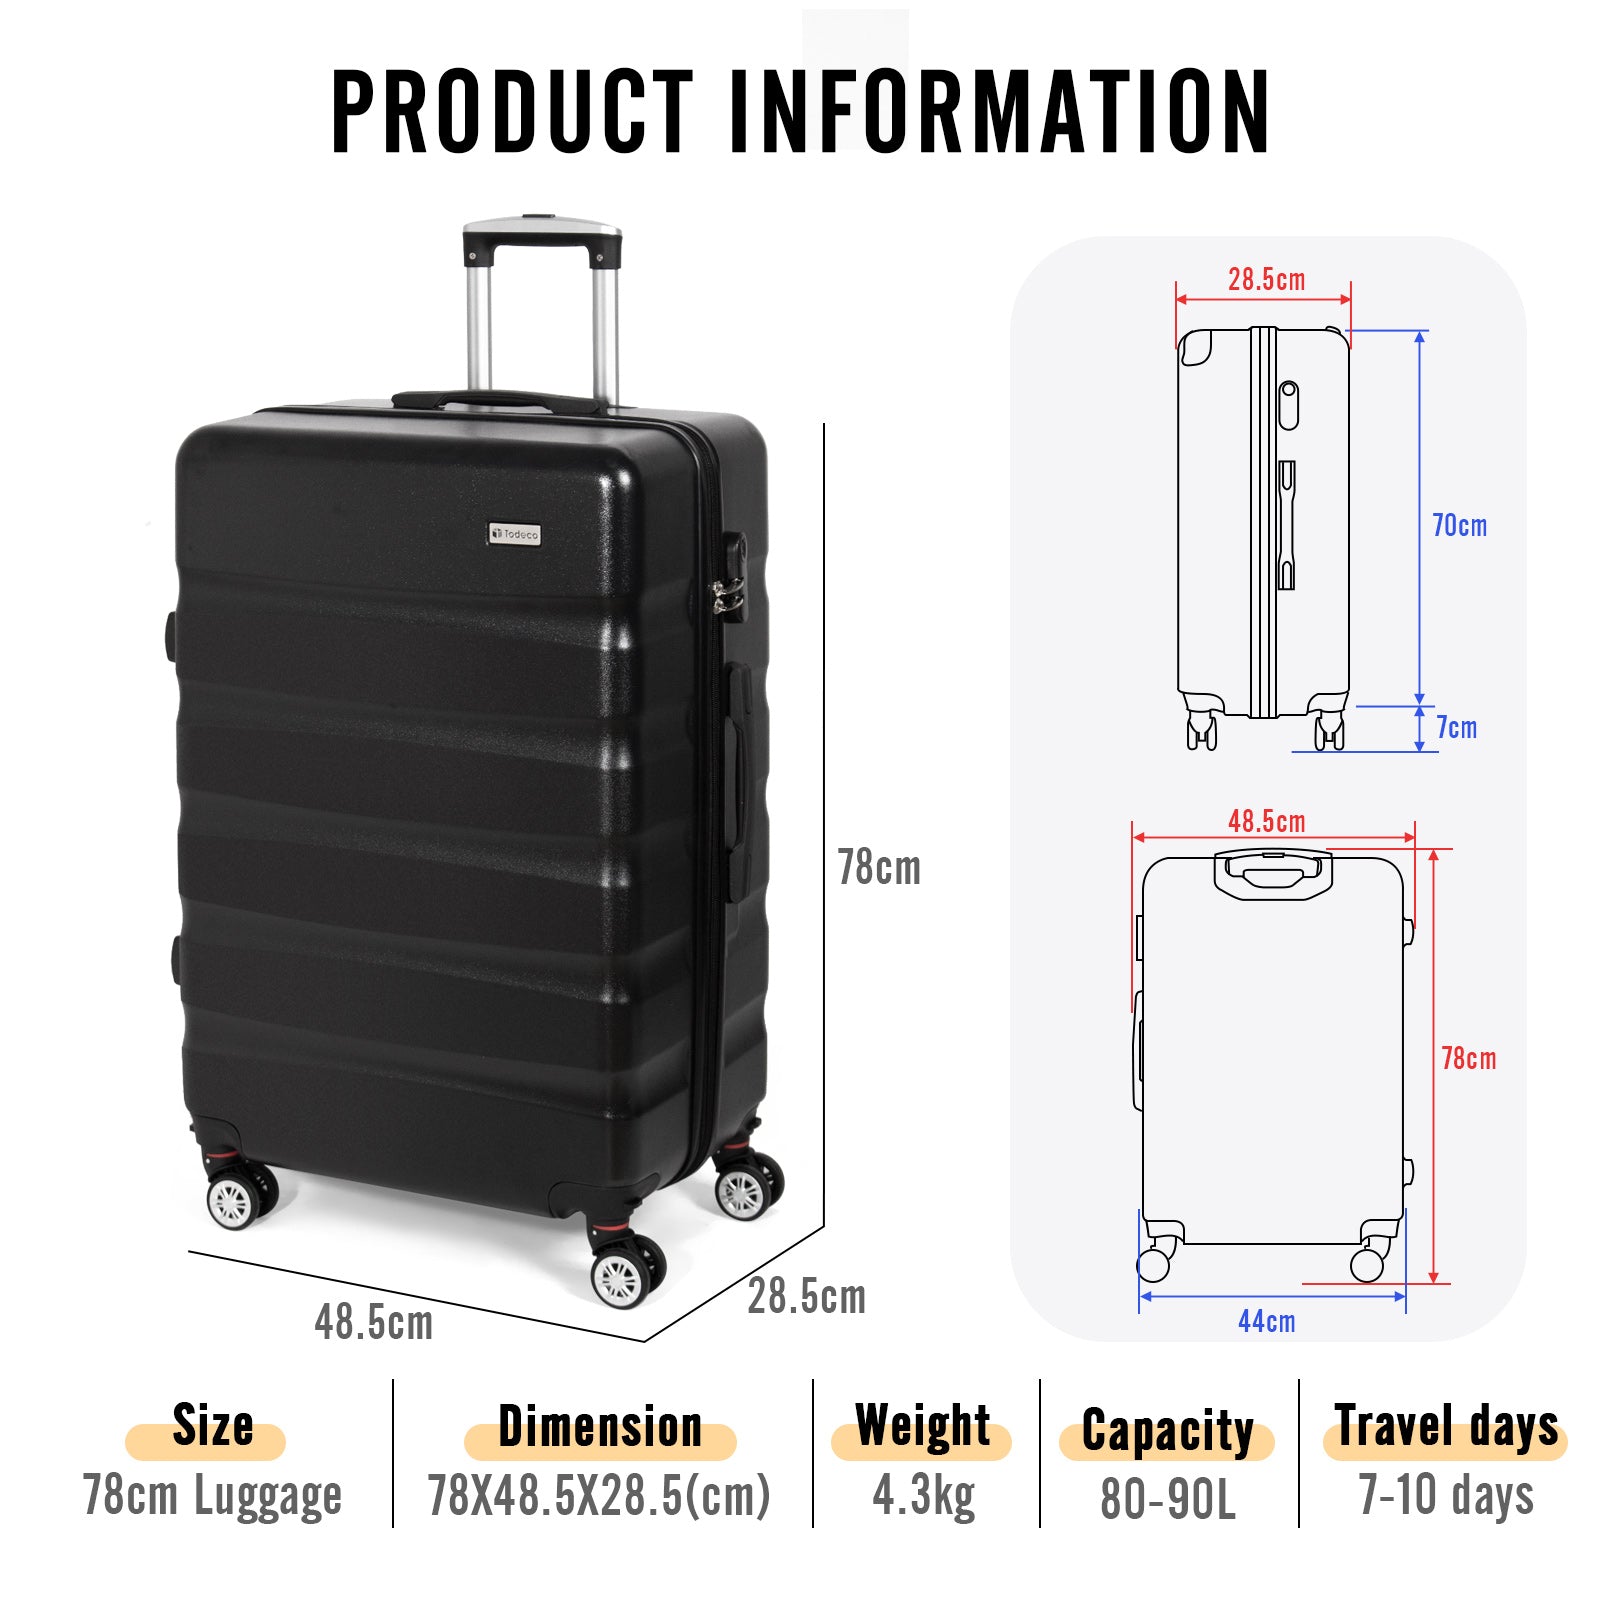 Todeco-Large-Suitcase-78cm-Rigid-and-Lightweight-ABS-PC-Lightweight-Carry-on-Suitcase-with-Hard-Shell-Travel-Suitcase-with-4-Double-Wheels-78-48-28cm-Black